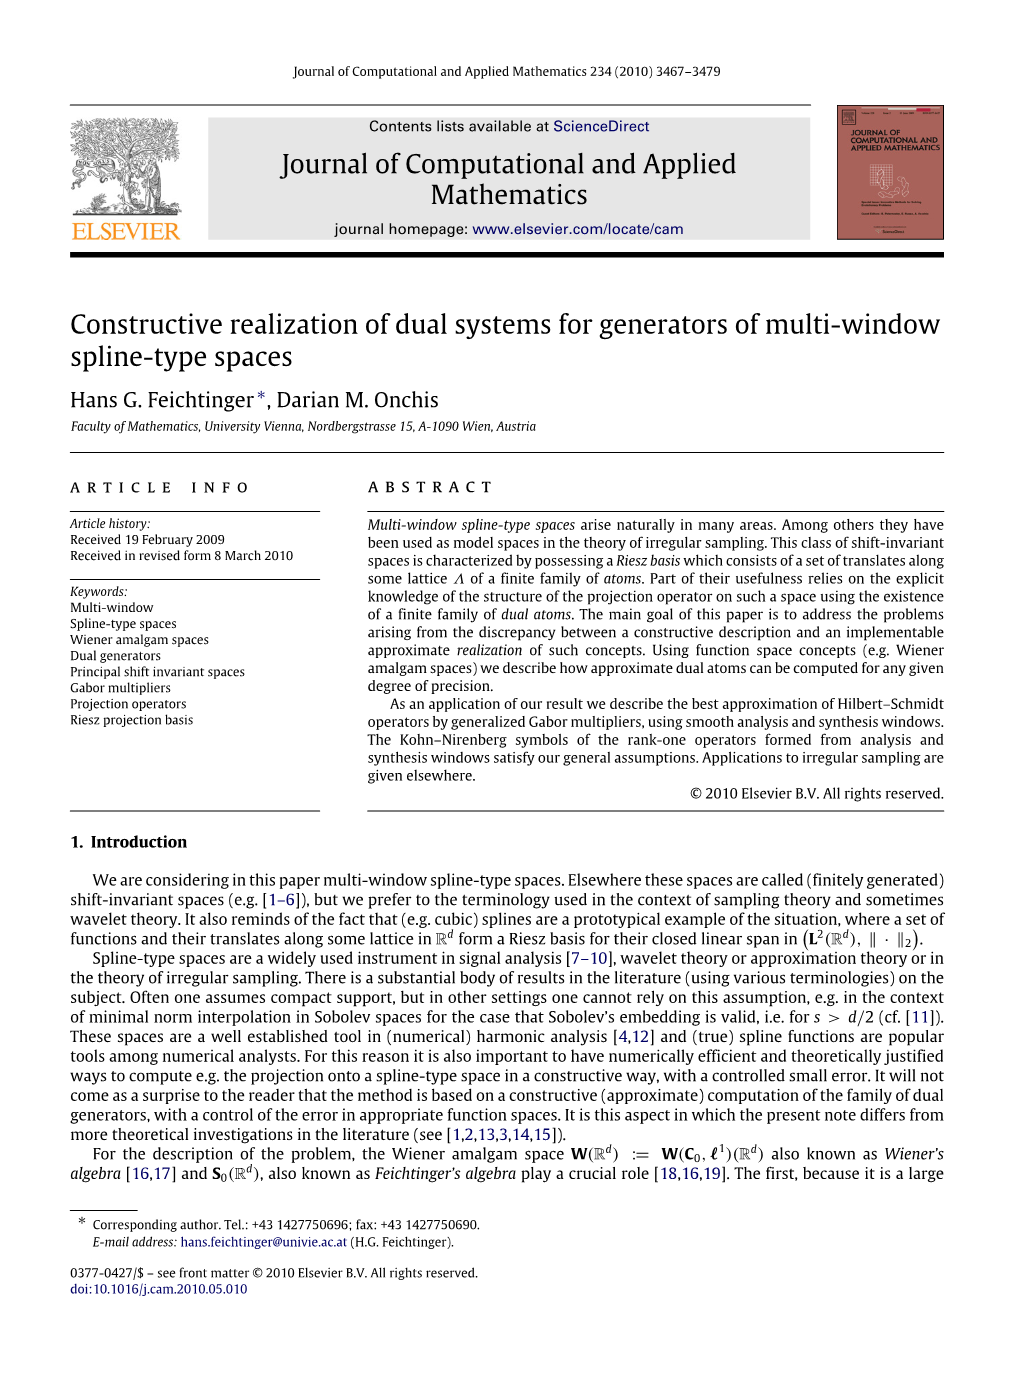 Constructive Realization of Dual Systems for Generators of Multi-Window Spline-Type Spaces Hans G